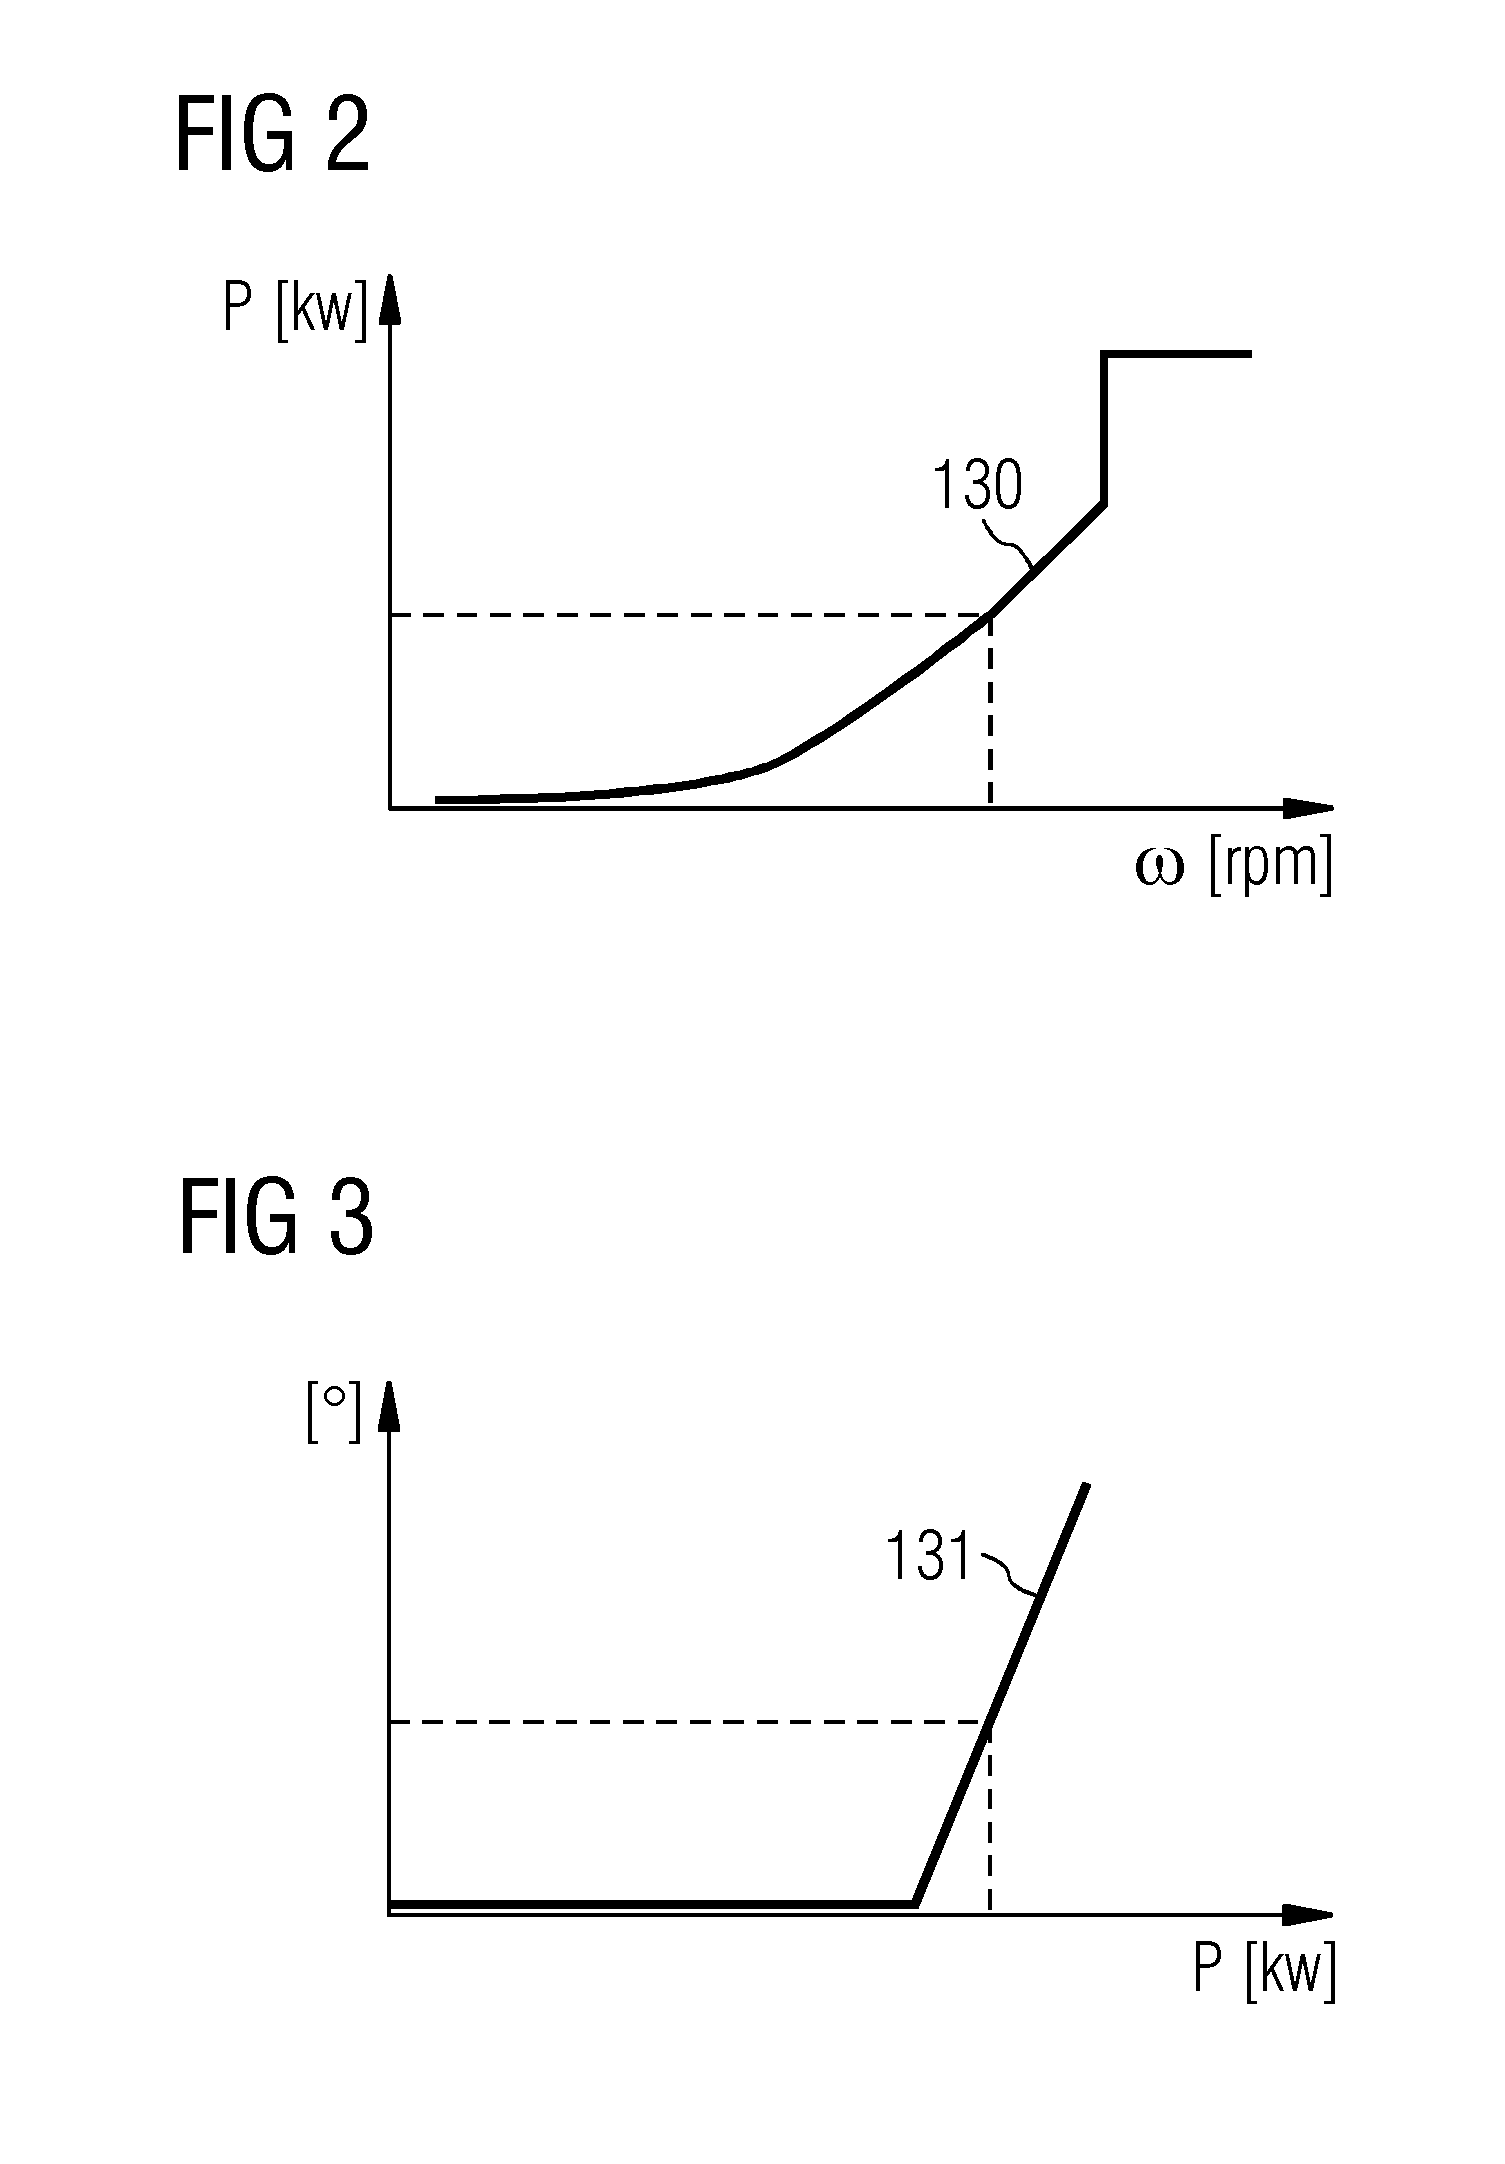 System for automatic power estimation adjustment